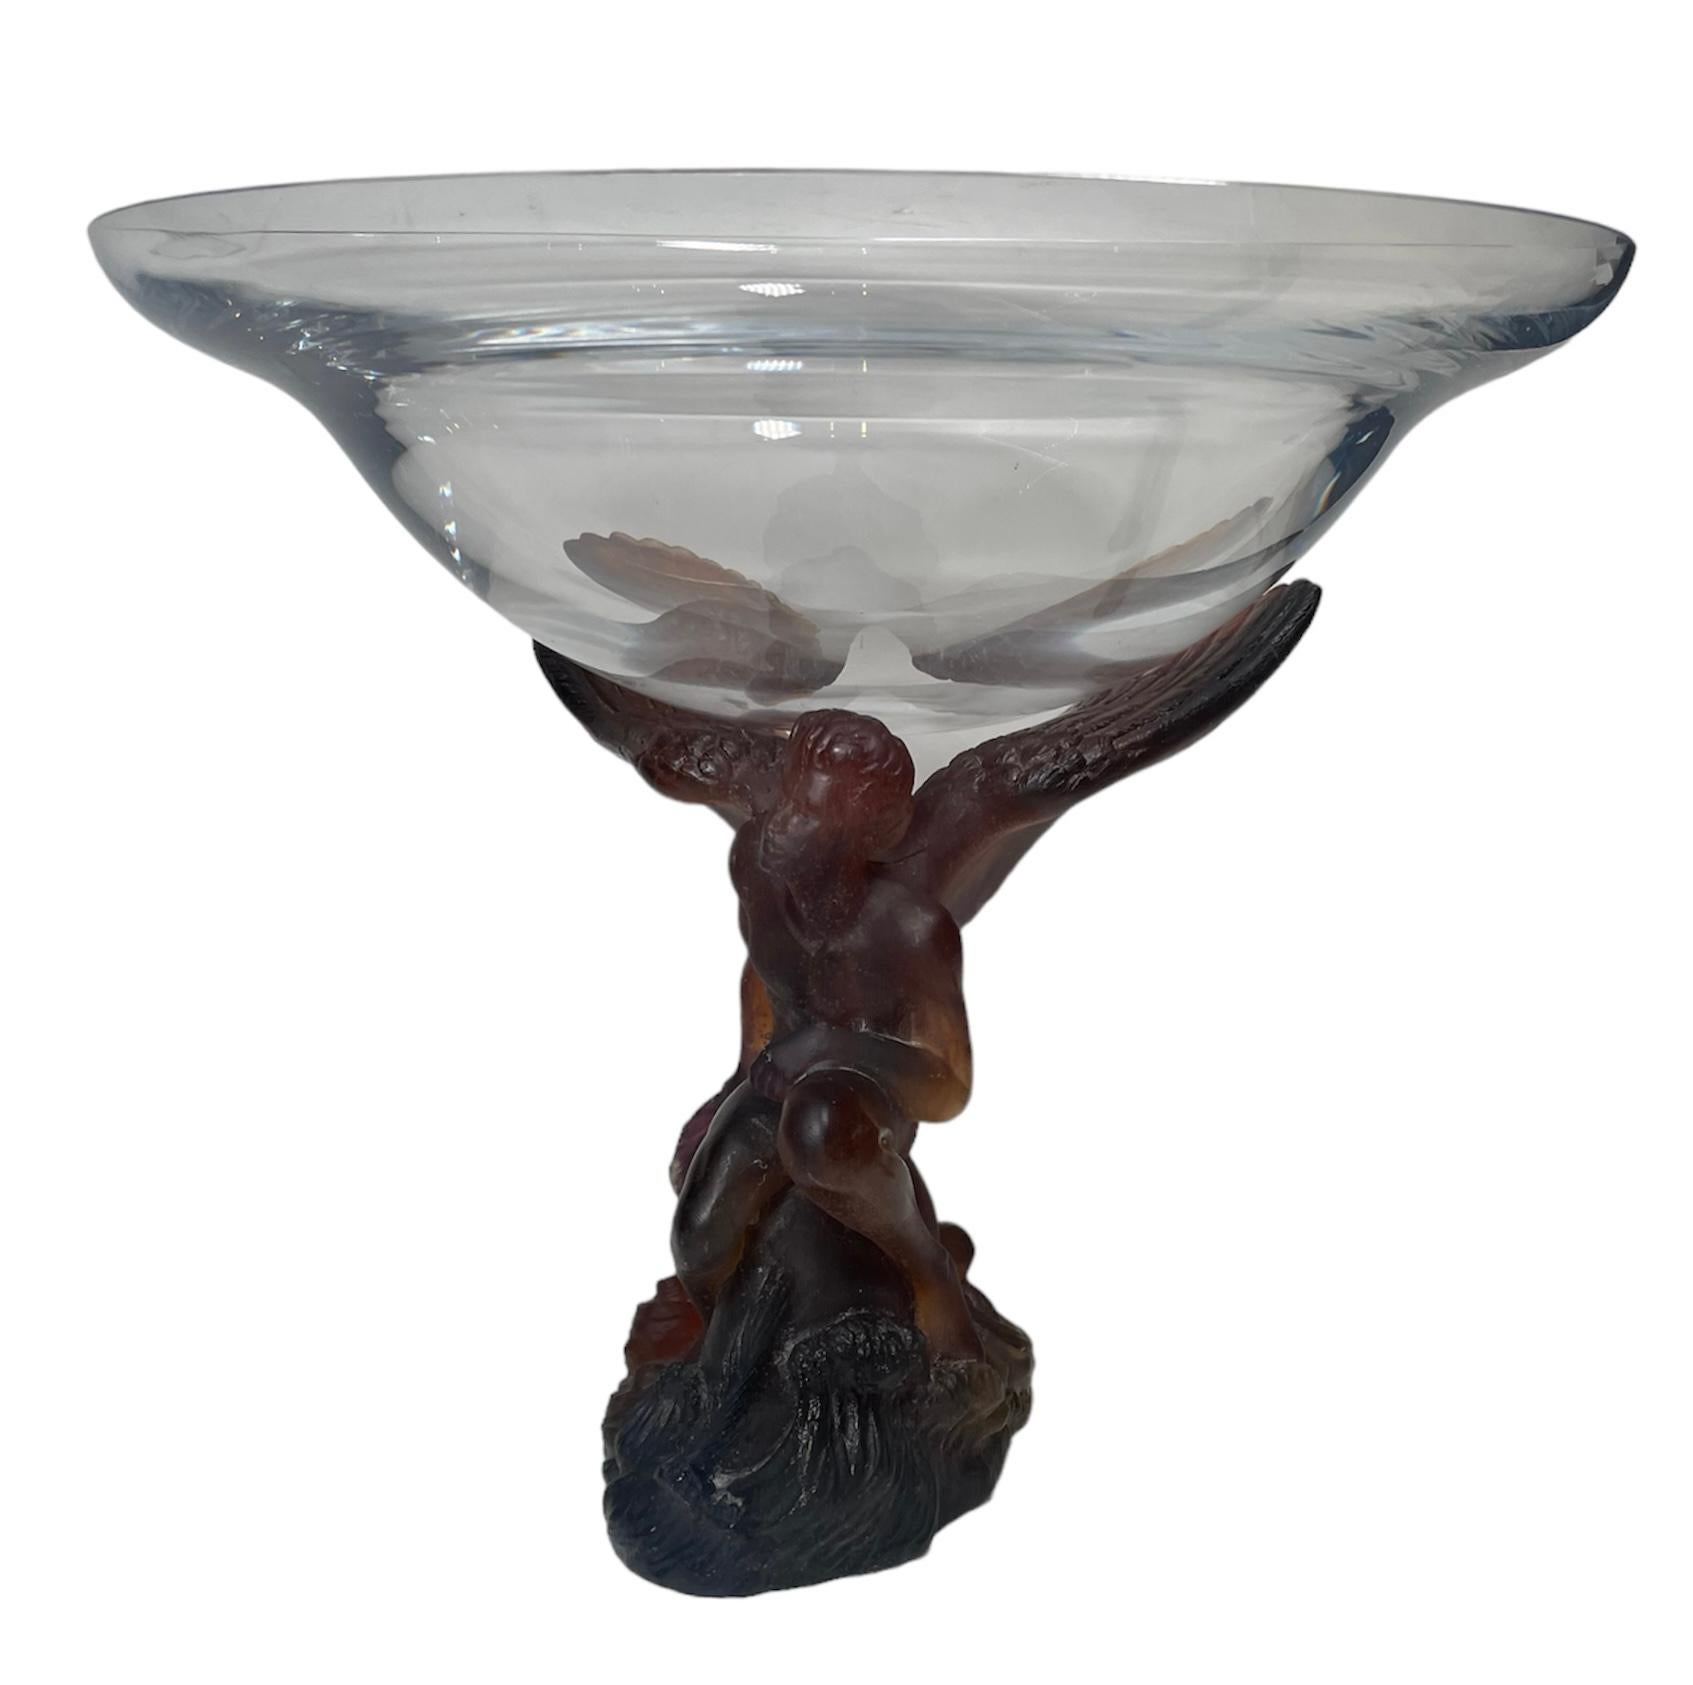 This is a Daum Pate de Verre Crystal Angel Sculpture compote/bowl. It depicts an amber brown color kneeling angel with big wings that serve to support the clear glass bowl. The sculpture is signed Daum France in the back.